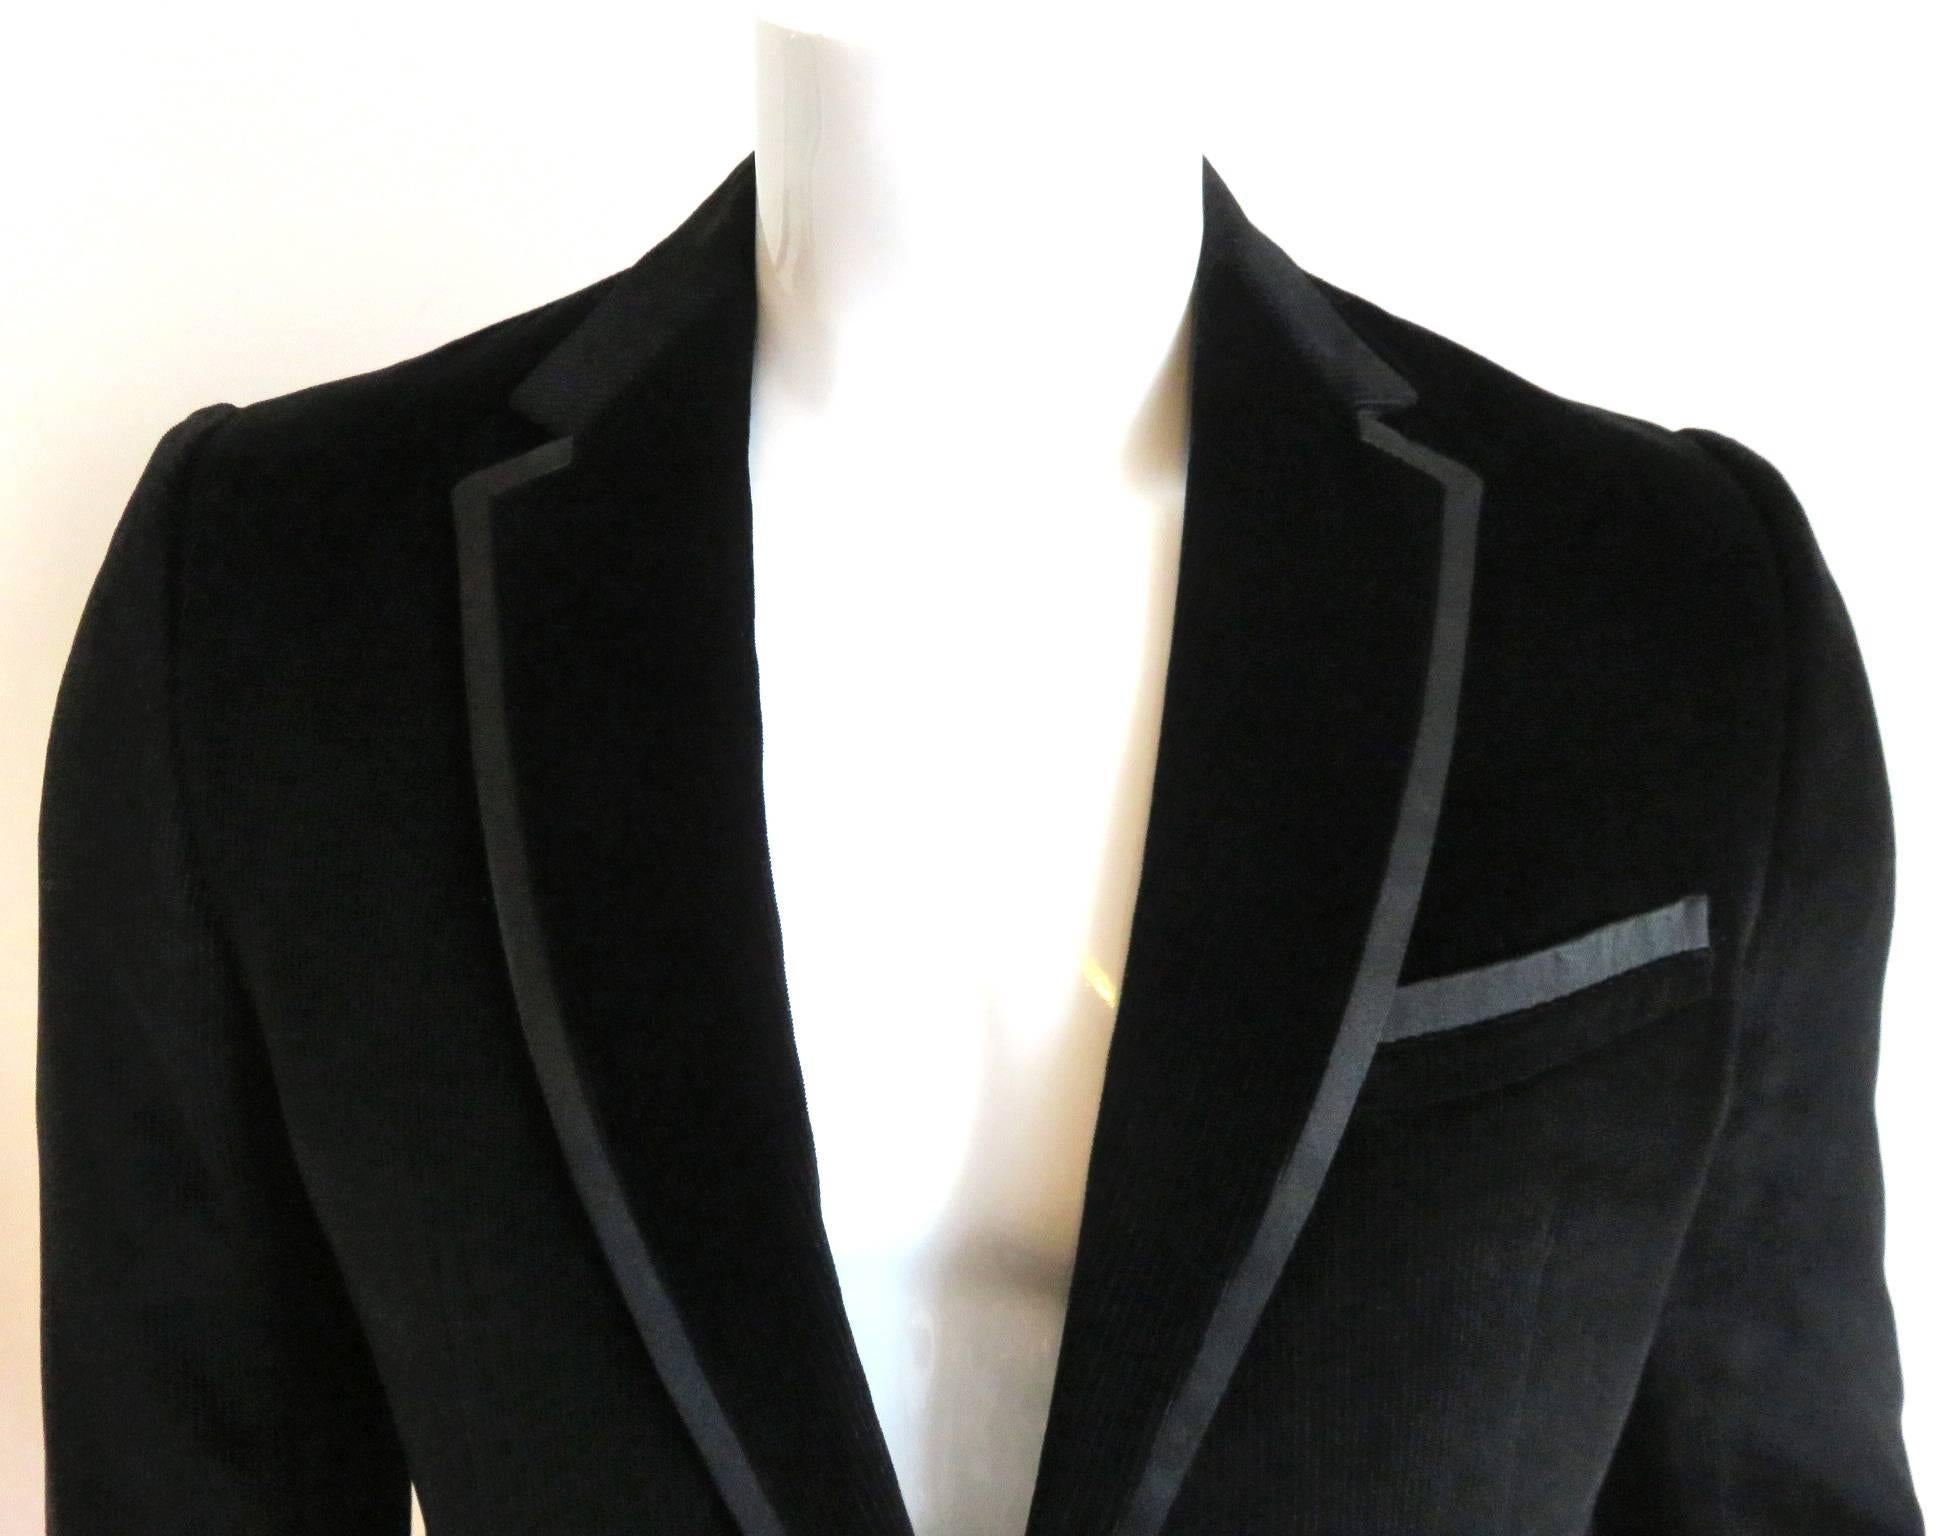 EDITOR'S NOTES:

Never-worn, GUCCI ITALY, plush, black pin-wale corduroy, evening, tuxedo blazer jacket.

Fabric has a plush, velvety hand-feel, and was purchased as an evening, blazer jacket.

Satin edge trim details at the front lapels, and